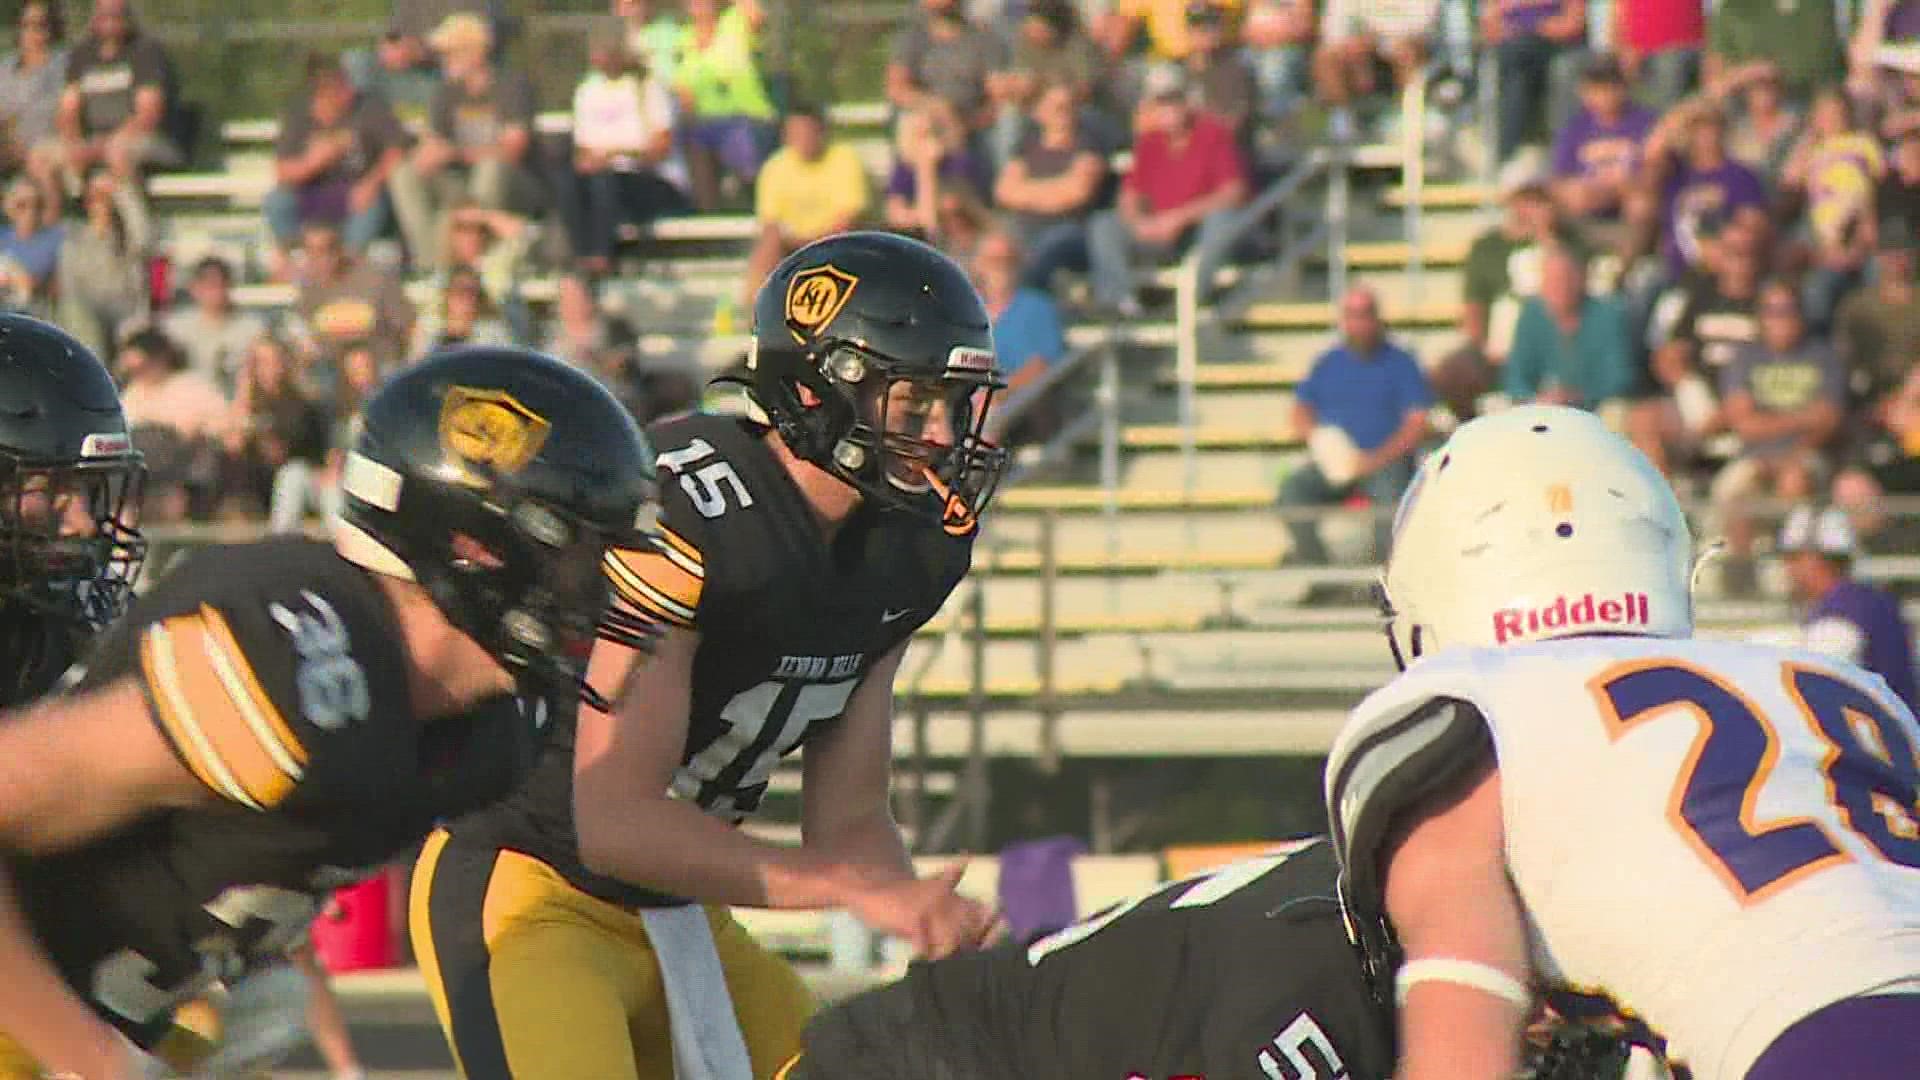 Kenowa Hills would cruise from there, Victory number 1 for them. Final was 30-7.